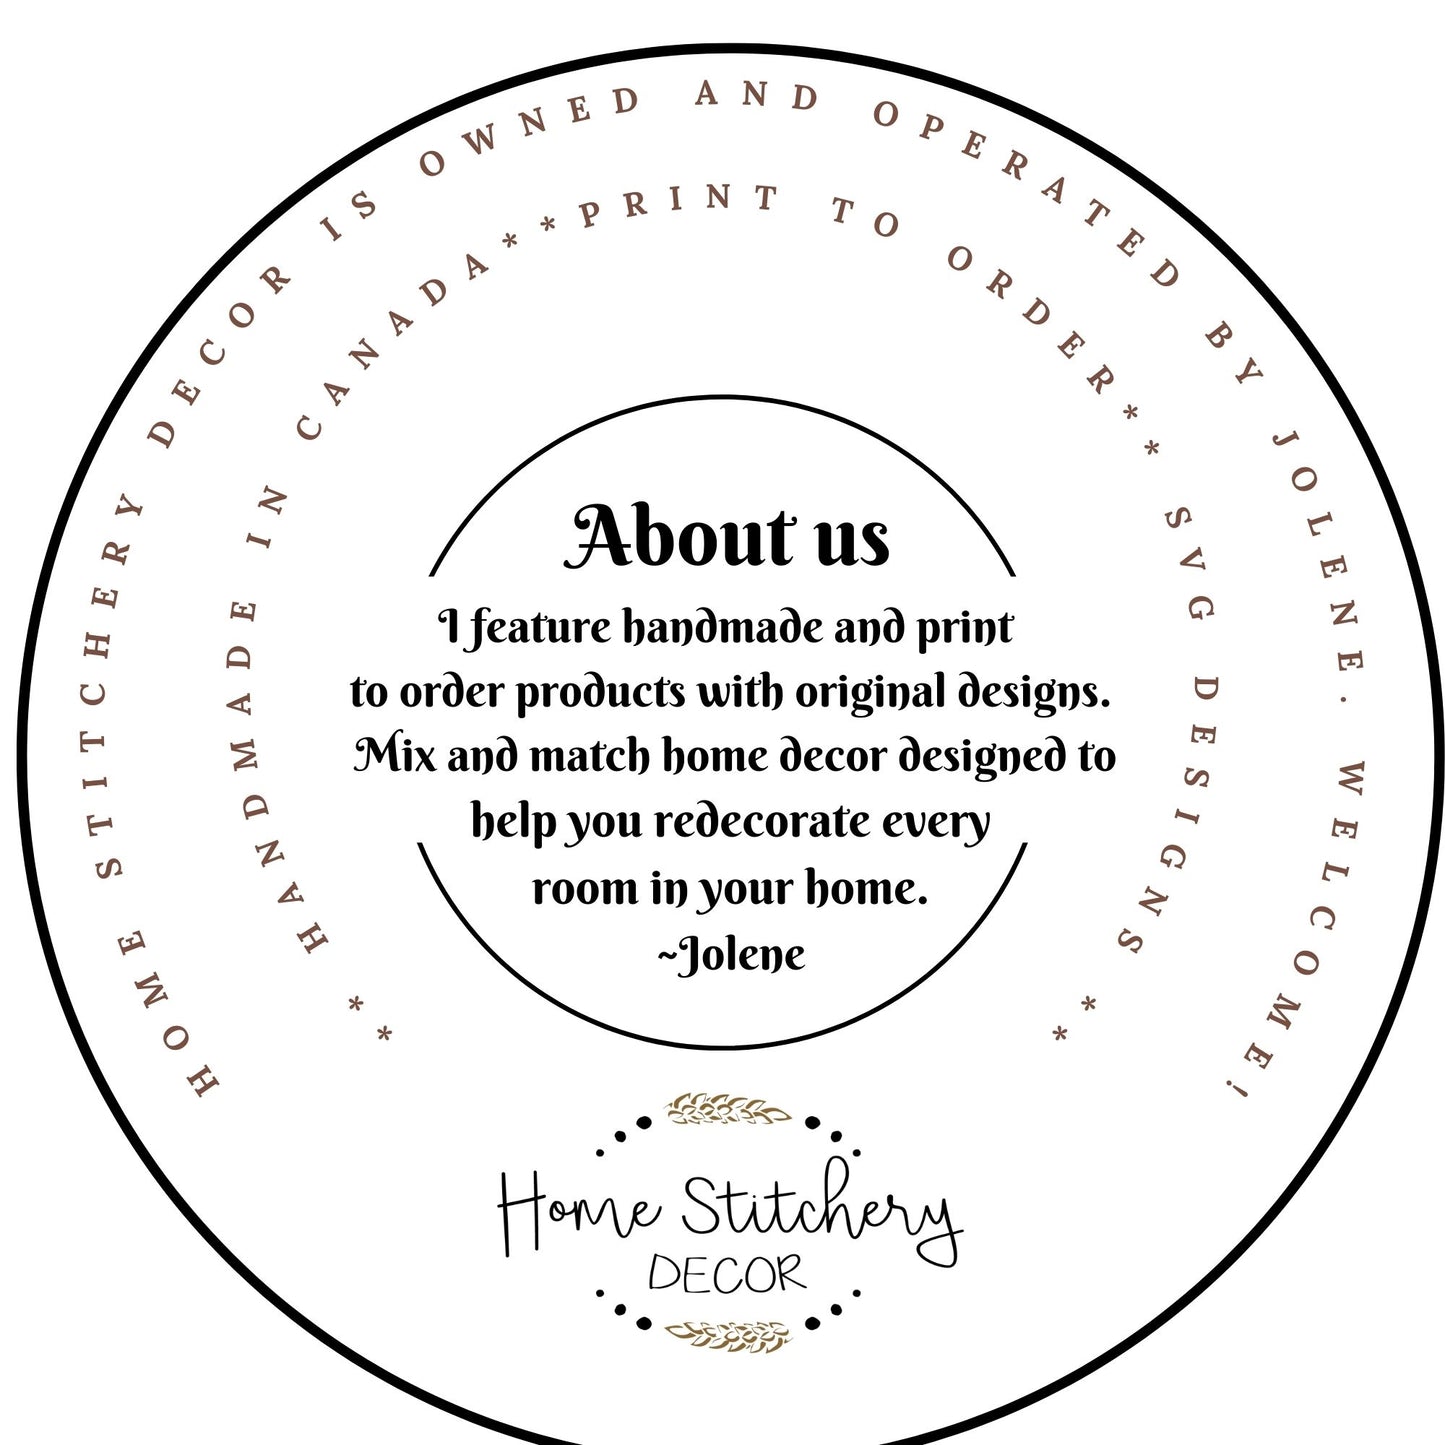 About us, Home Stitchery Decor is located in Calgary Alberta, Canada. We feature handmade and print to order products featuring our own original art work.  Mix and match collections of home decor.